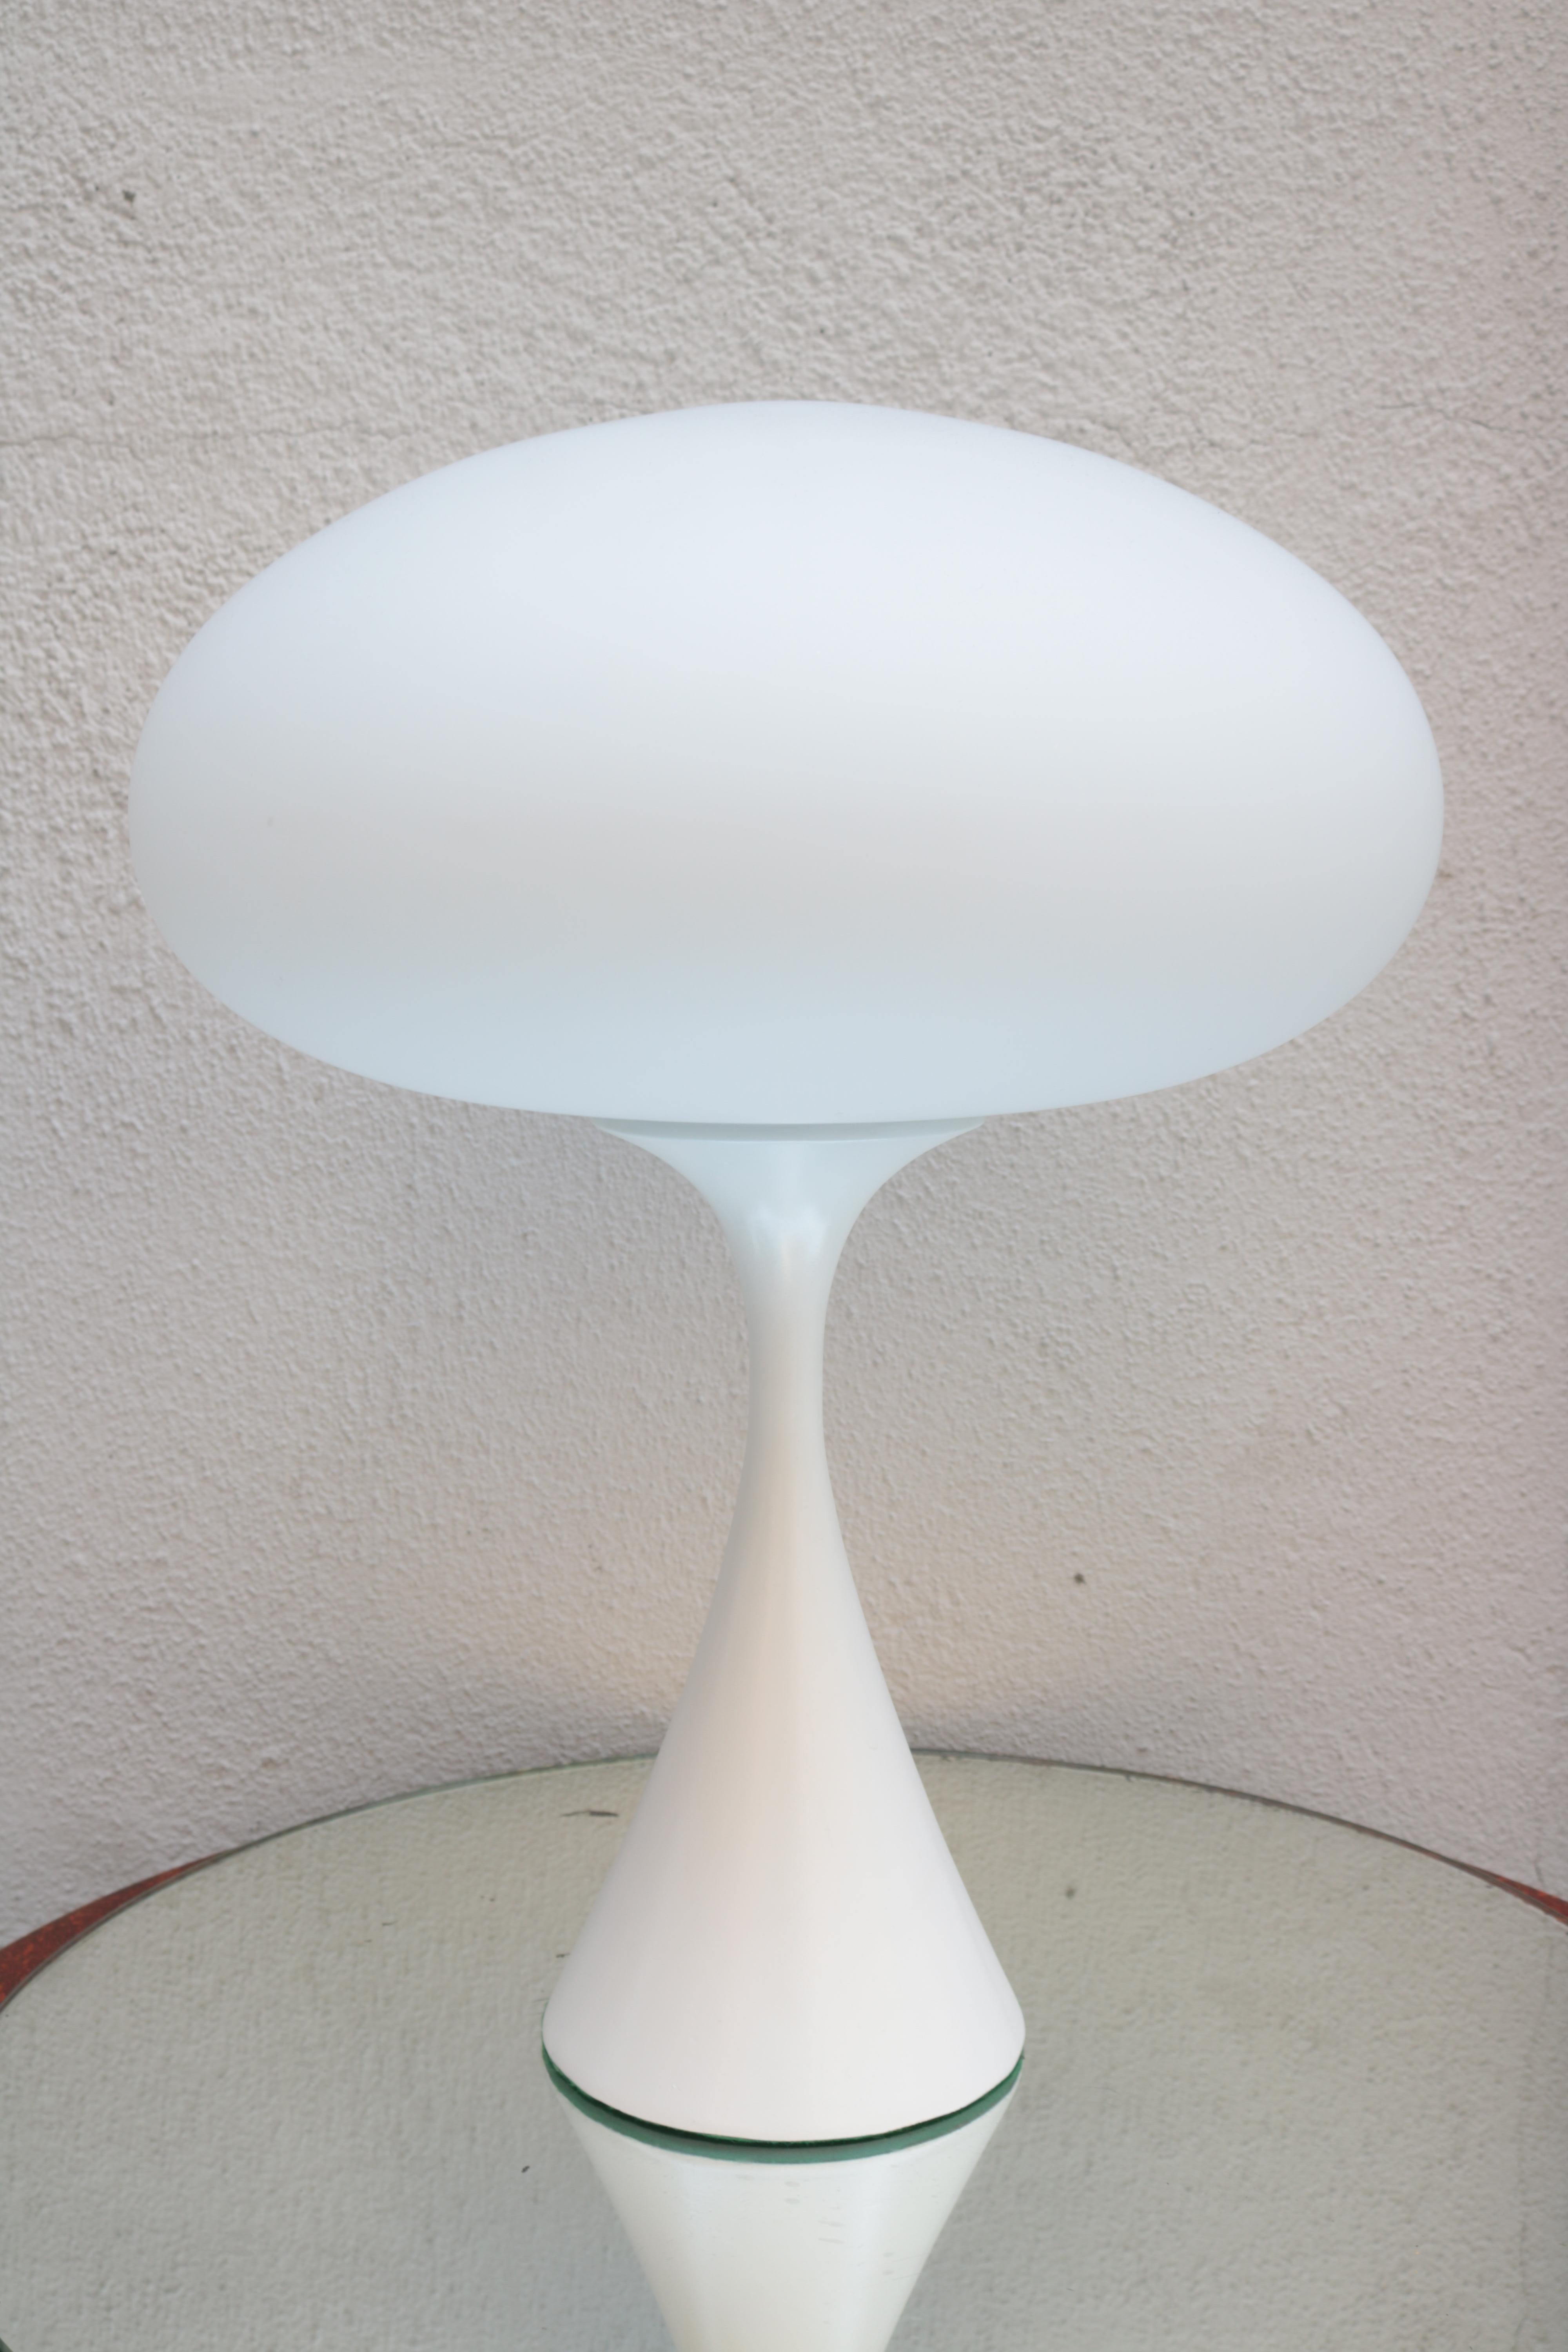 A modernist table lamp by Laurel.
Enameled metal and frosted glass shade.
 